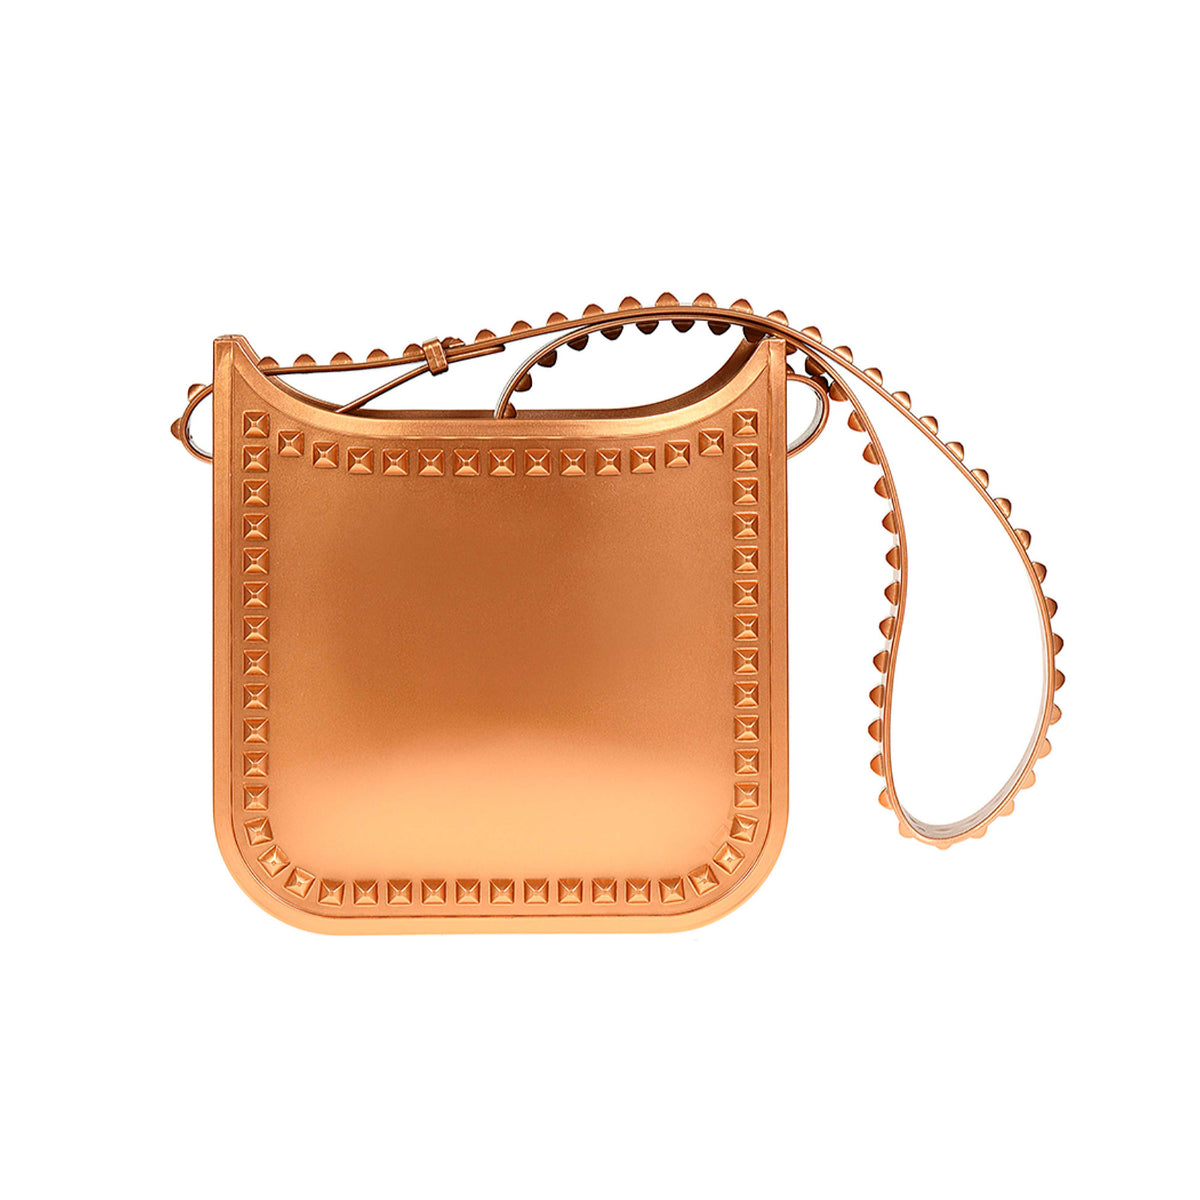 Rose gold Carmen Sol beach purse with studs and adjustable straps